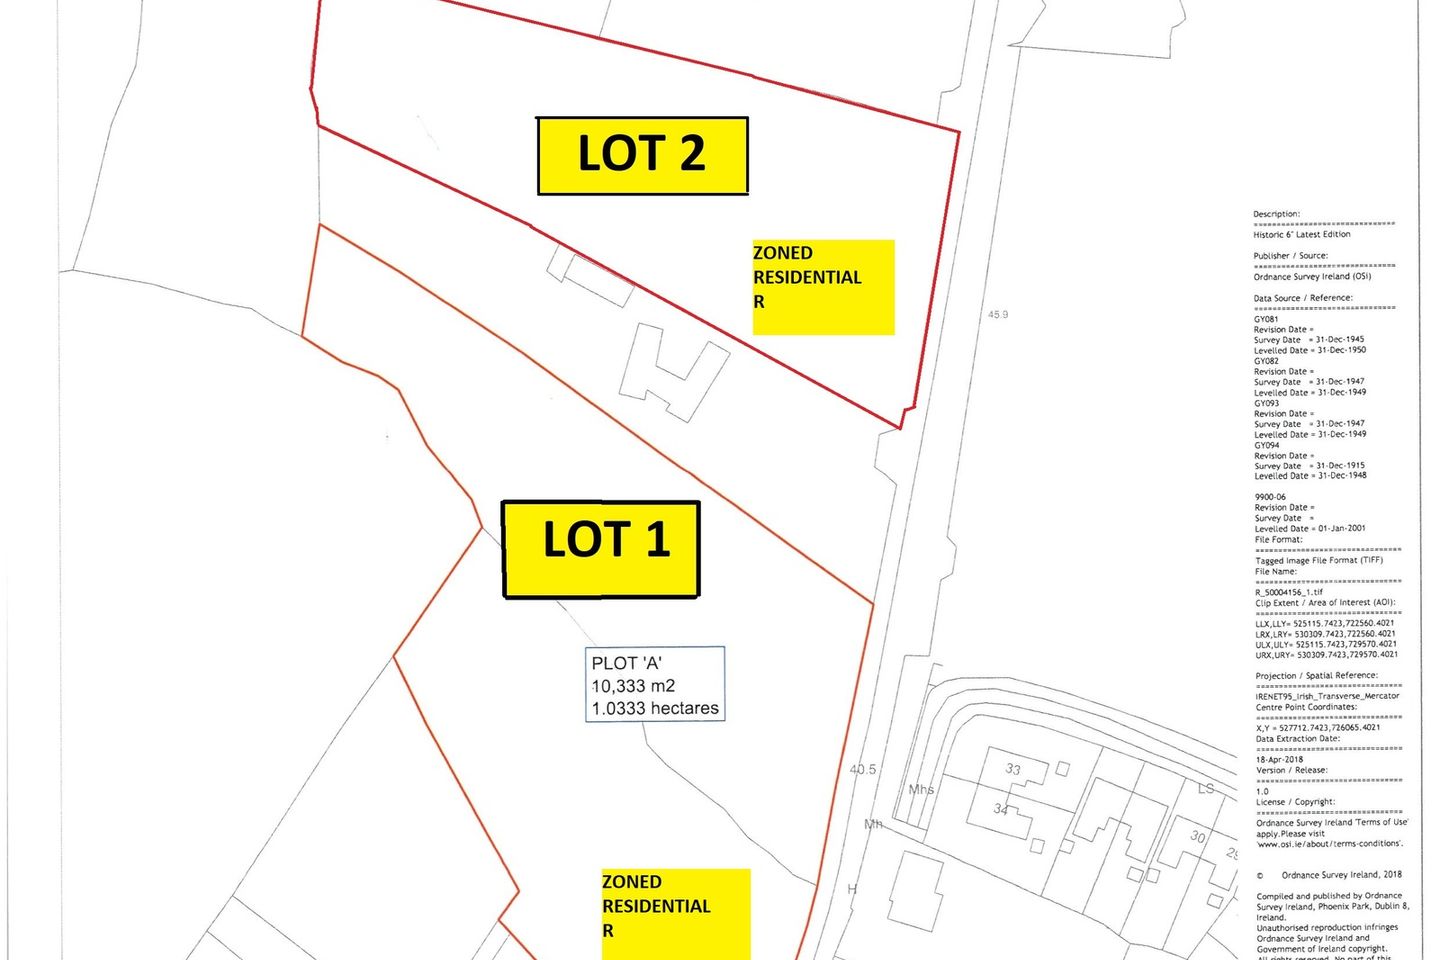 Prime Residential Zoned Roadside Lands at Circular Road, Galway City Centre